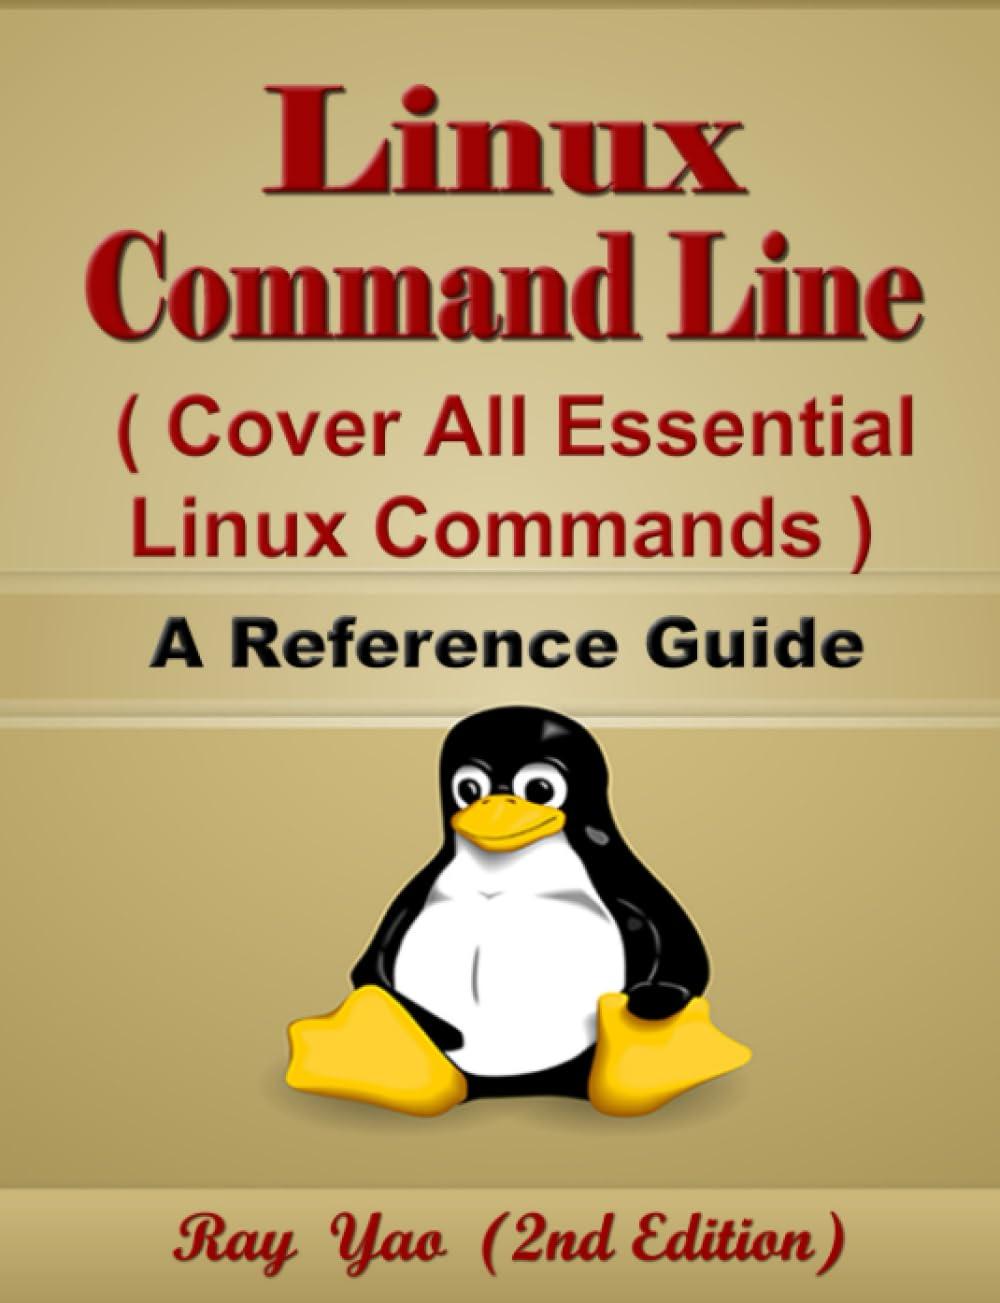 linux command line cover all essential linux commands a reference guide 2nd edition ray yao b0chlc7ssy,